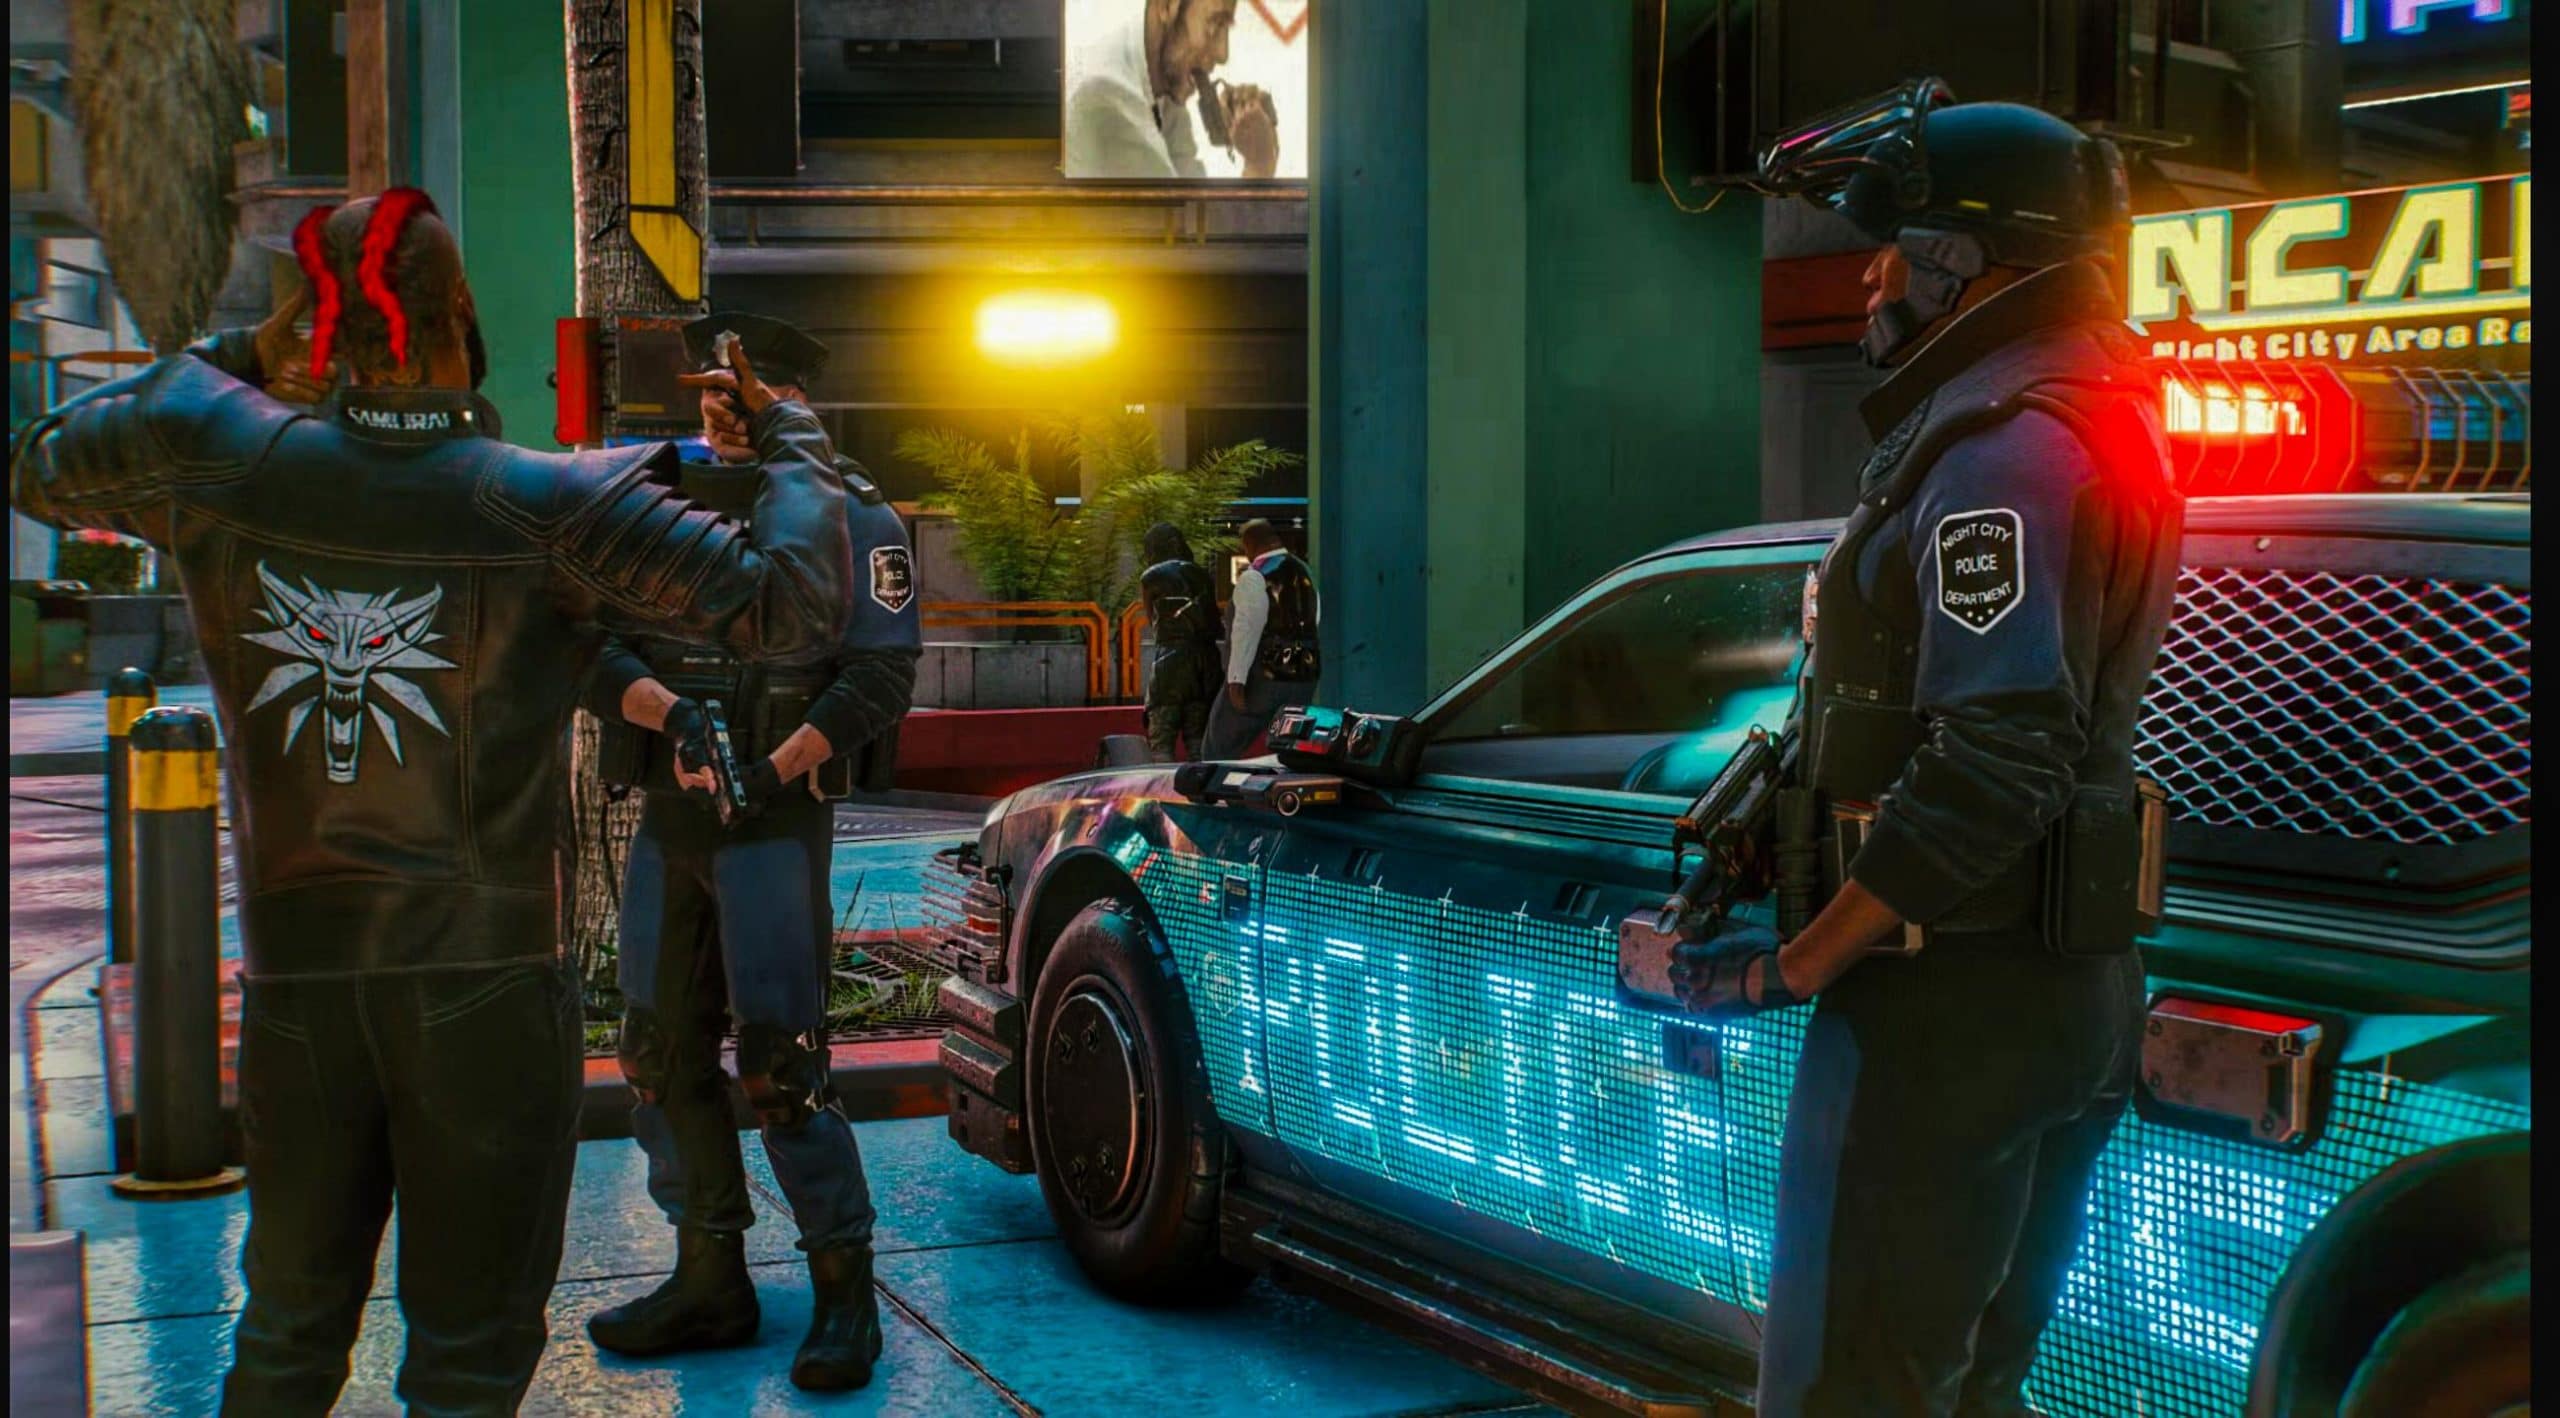 Cyberpunk 2077 has no police chases due to technical limitations